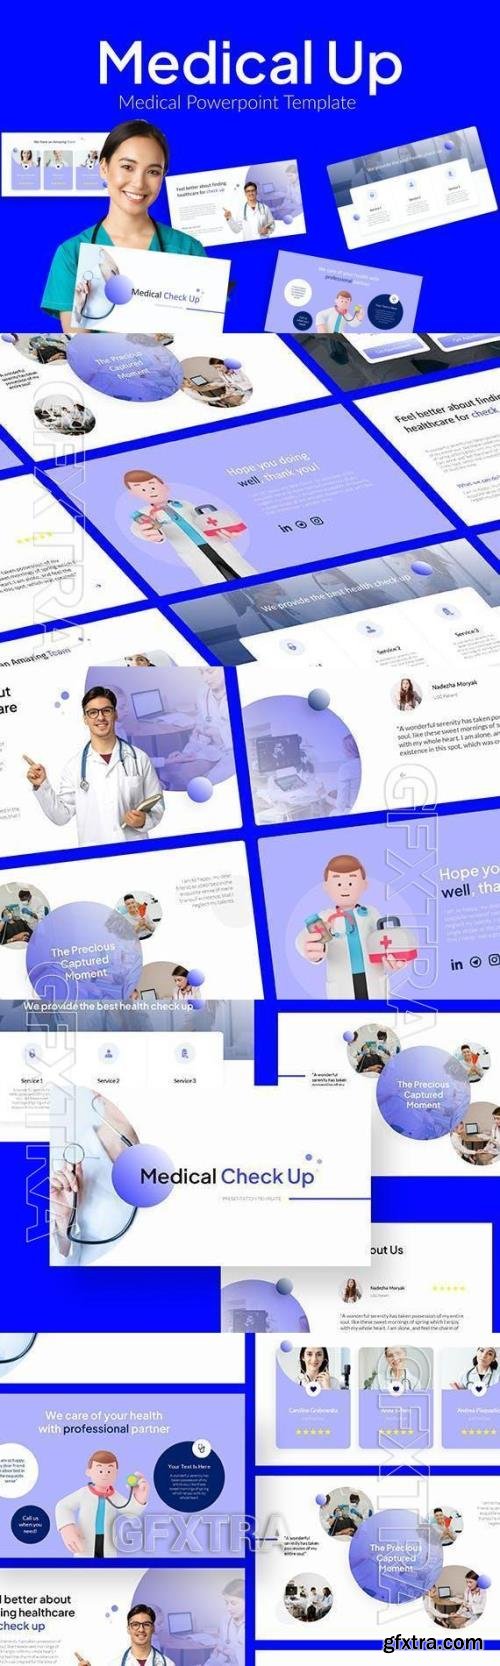 Medical Check Up Powerpoint Template 3RF2DY9